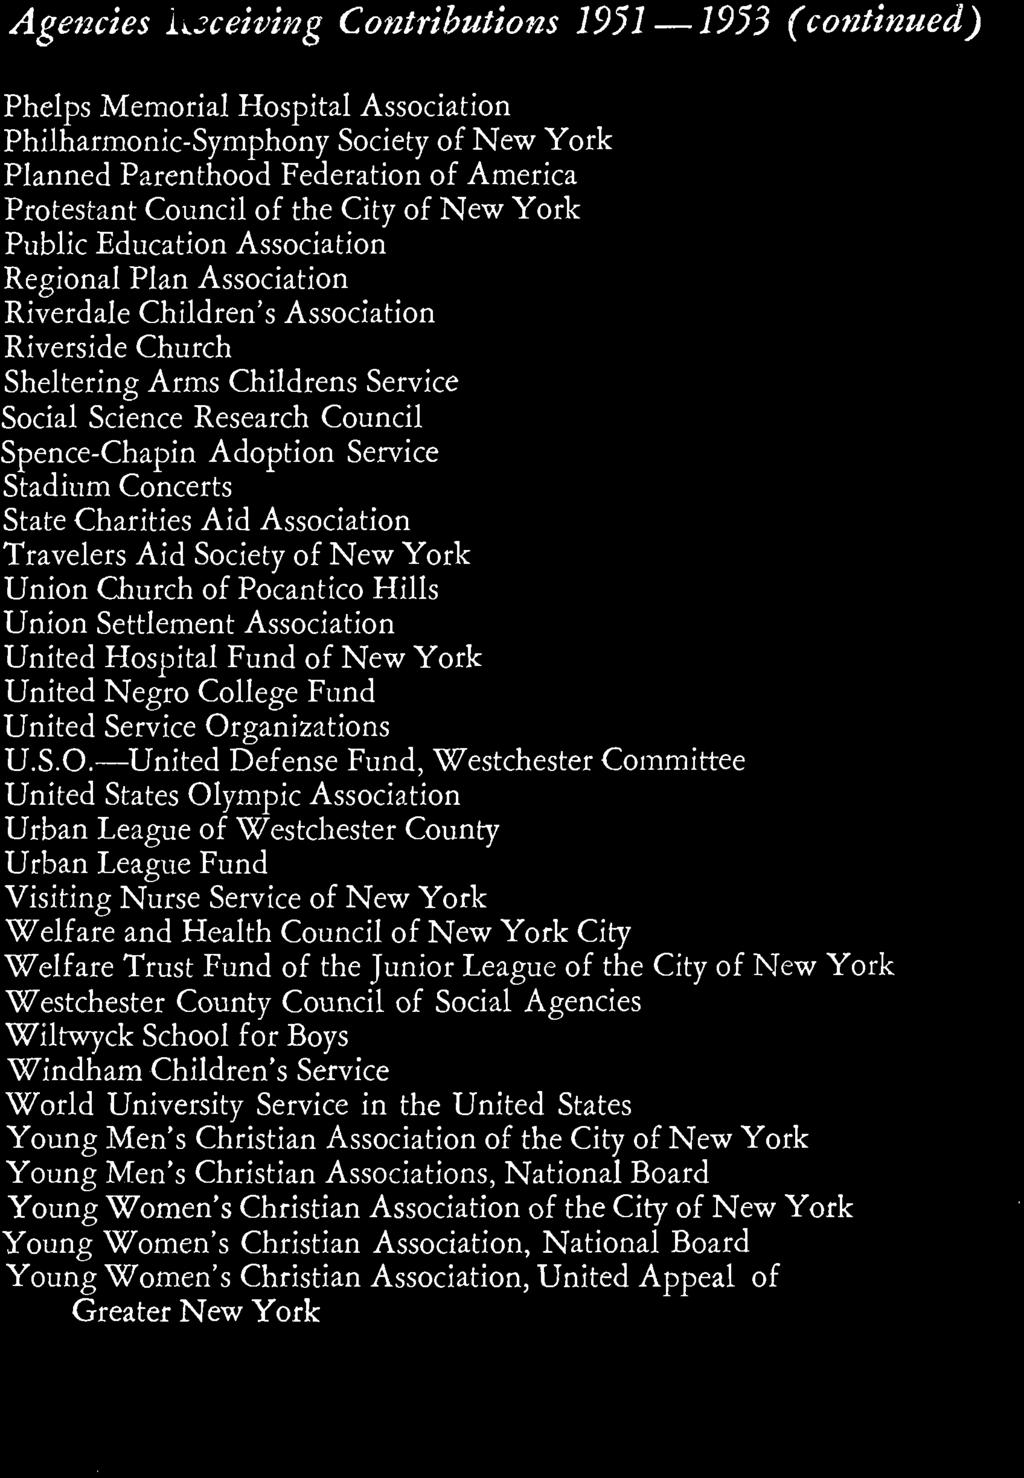 Welfare and Health Council of New York City Welfare Trust Fund of the Junior League of the City of New York Westchester County Council of Social Agencies Wiltwyck School